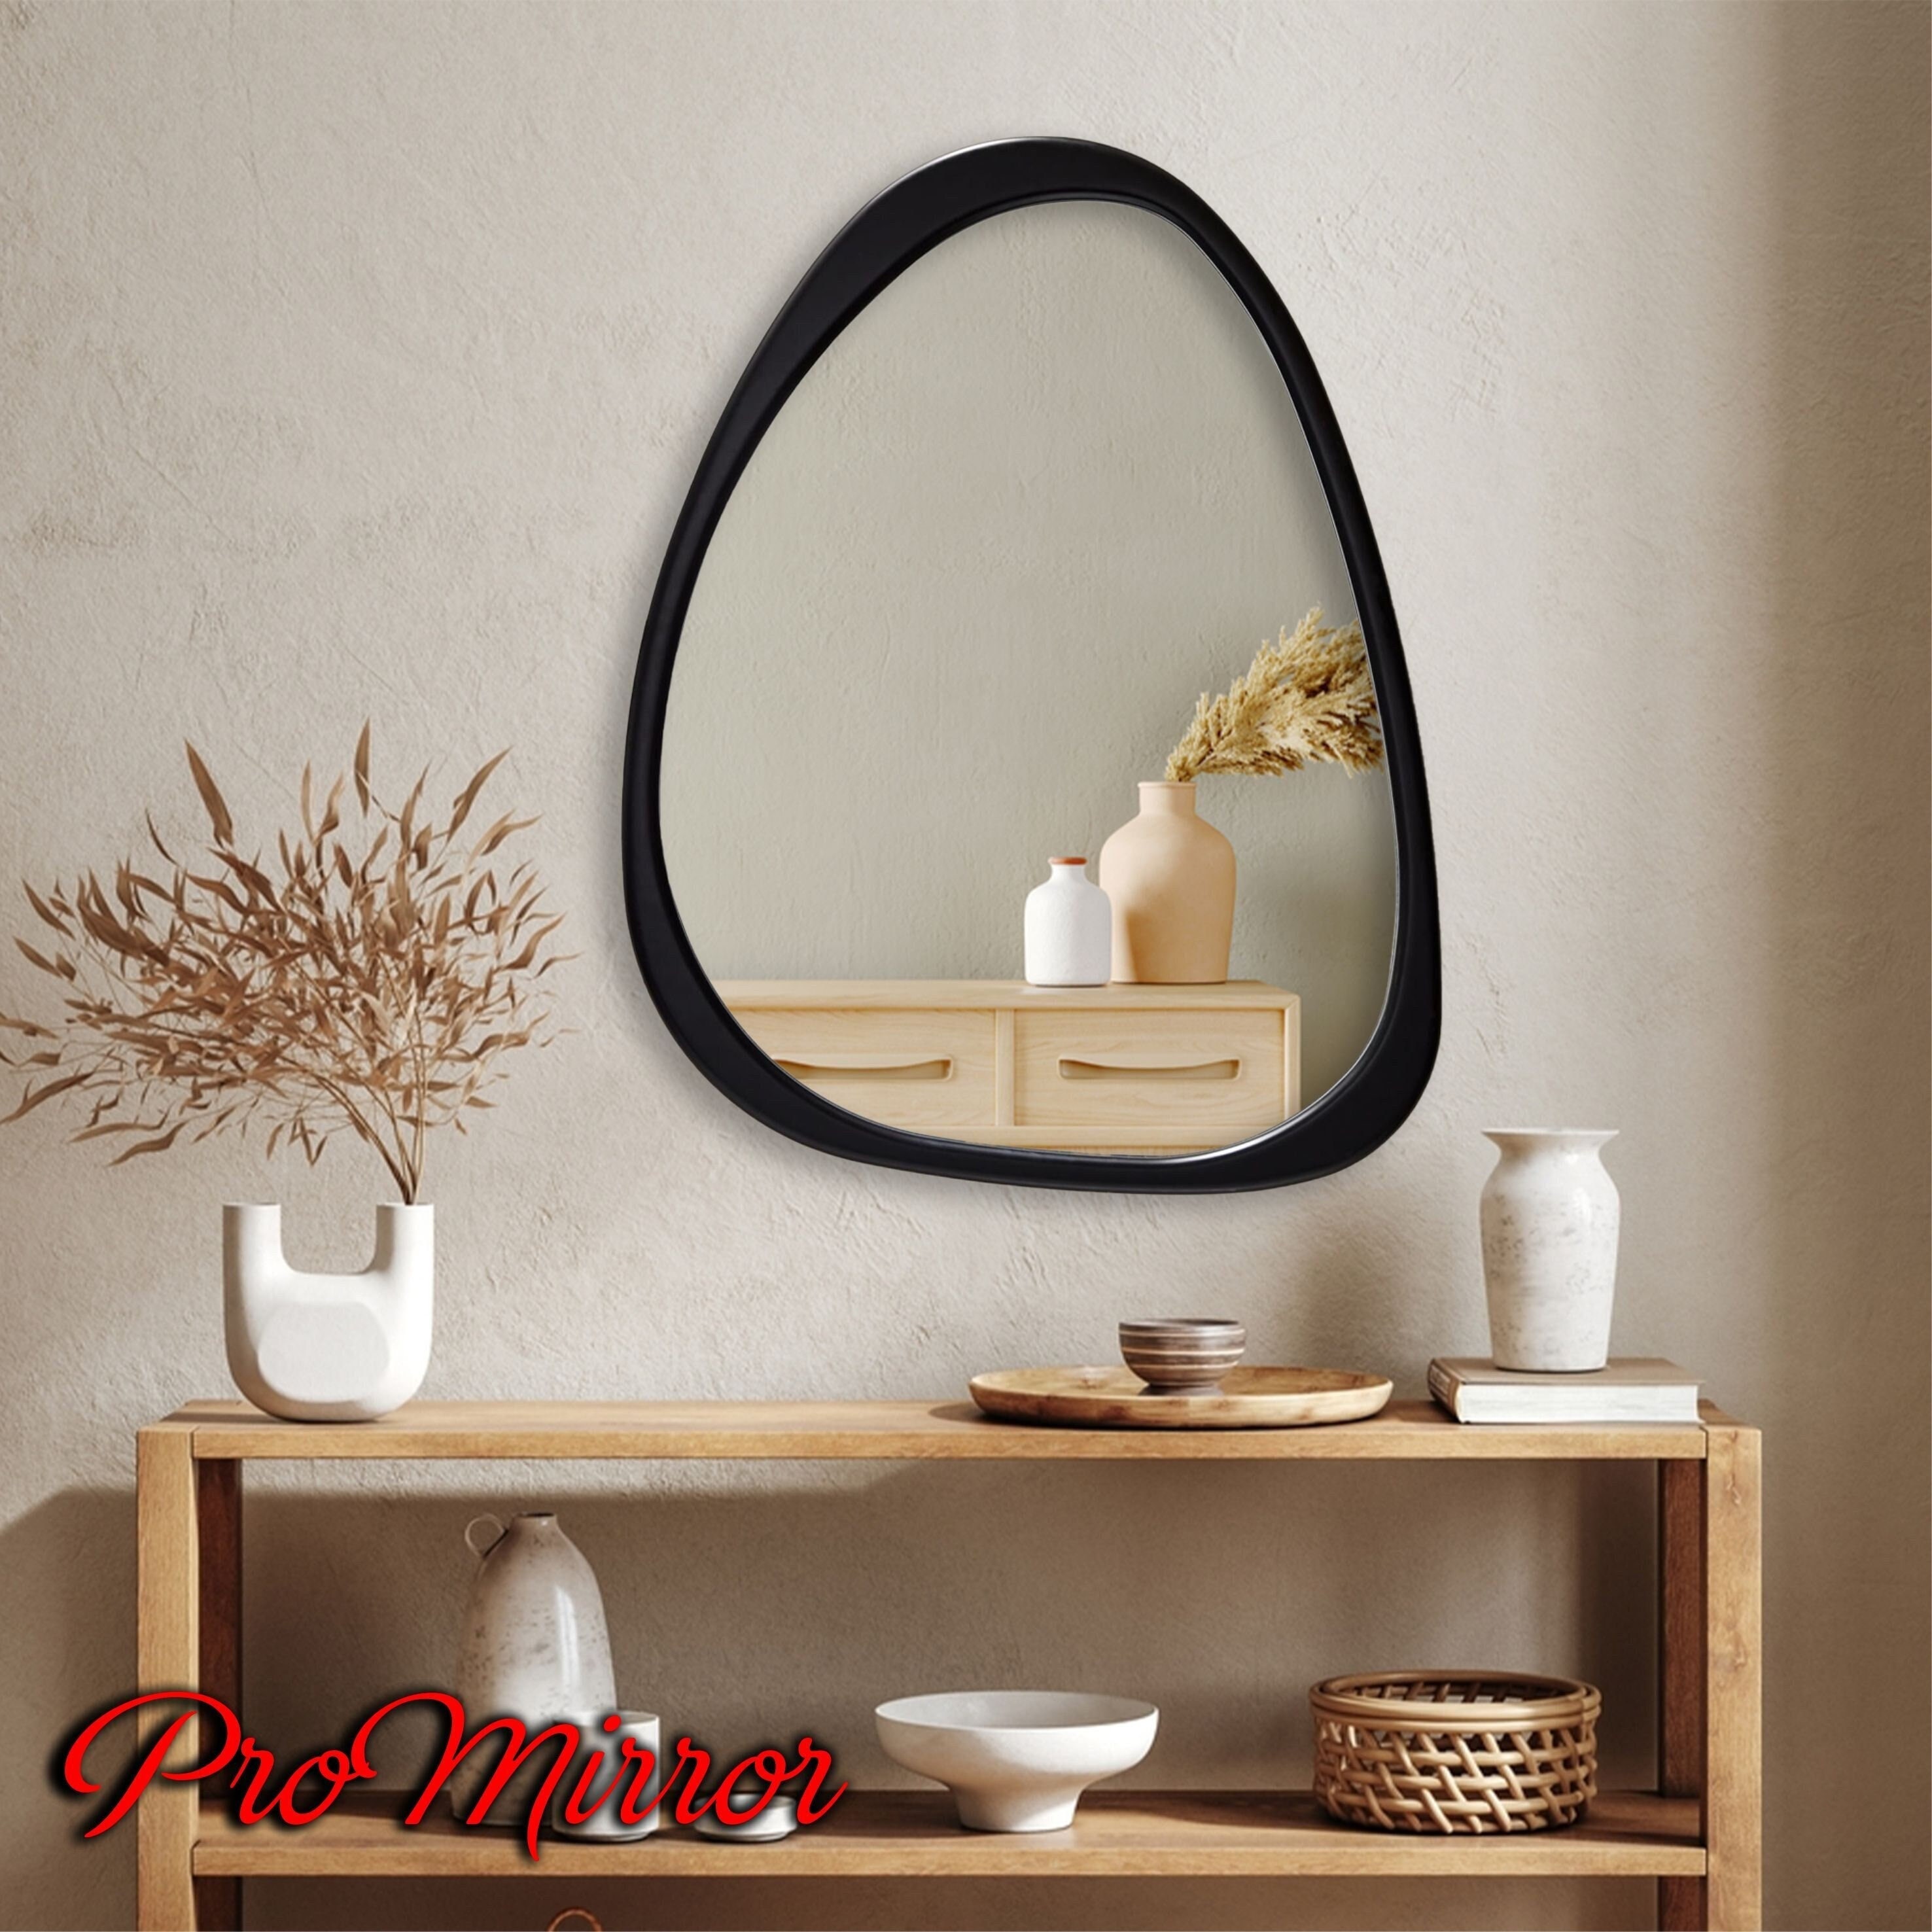 Small Round Mirror Made From Wood 20 / 50cm 